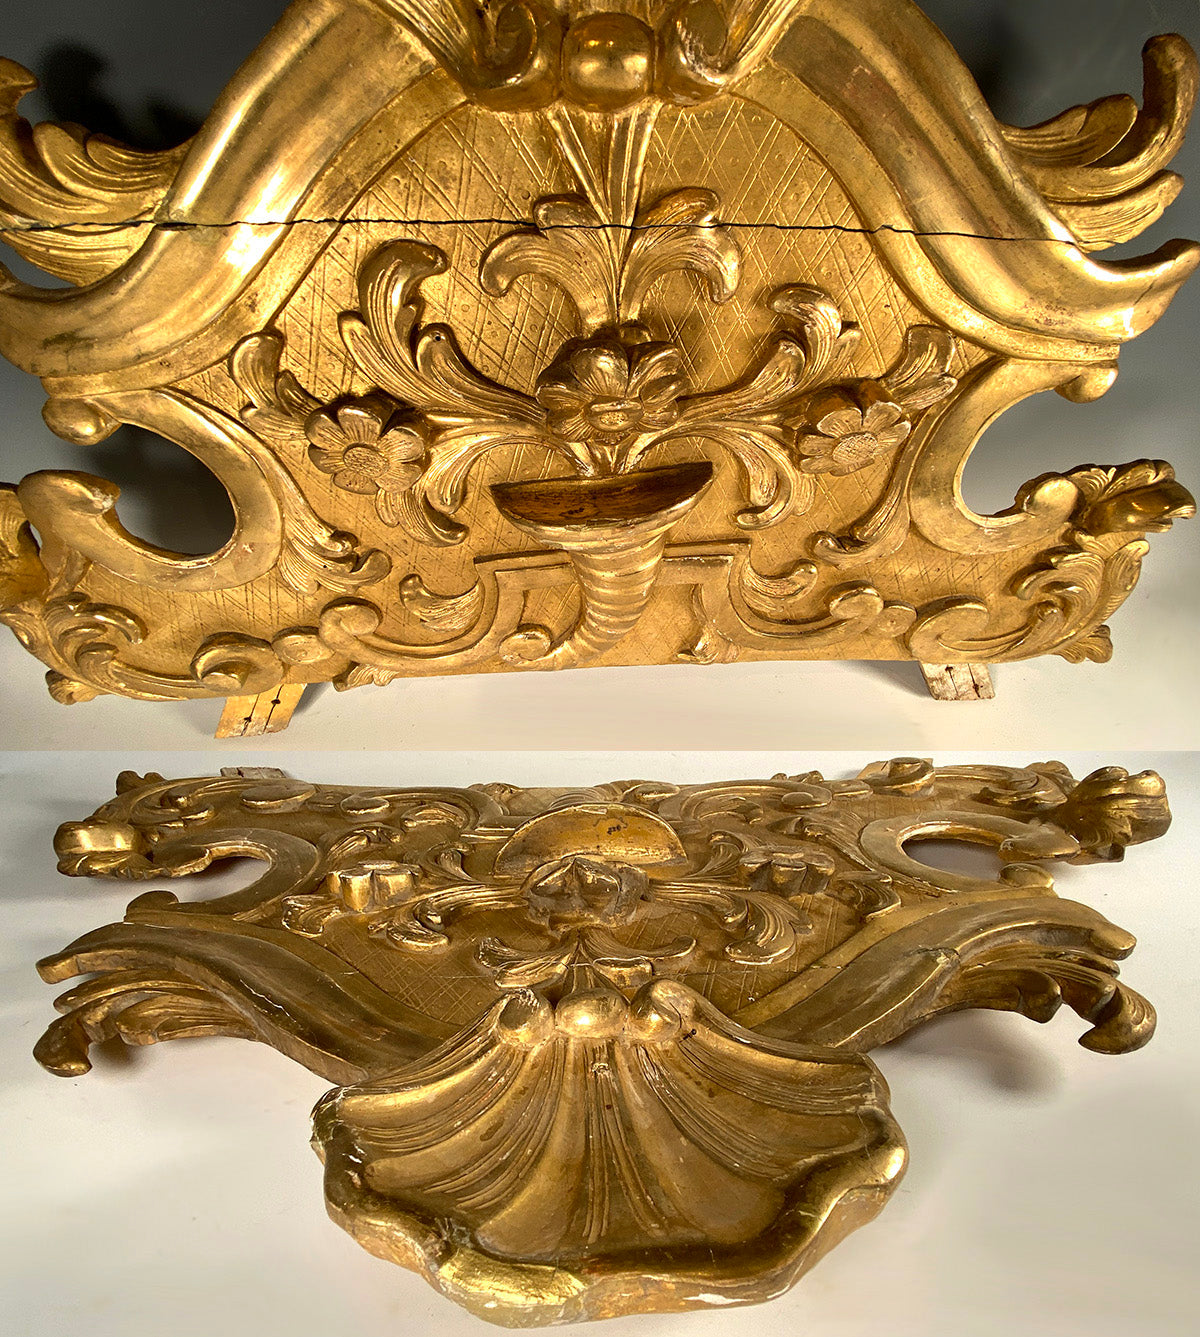 Antique French Hand Carved Gilded 24.5" Wood Pediment, Top for a Mirror or Frame or Doorway